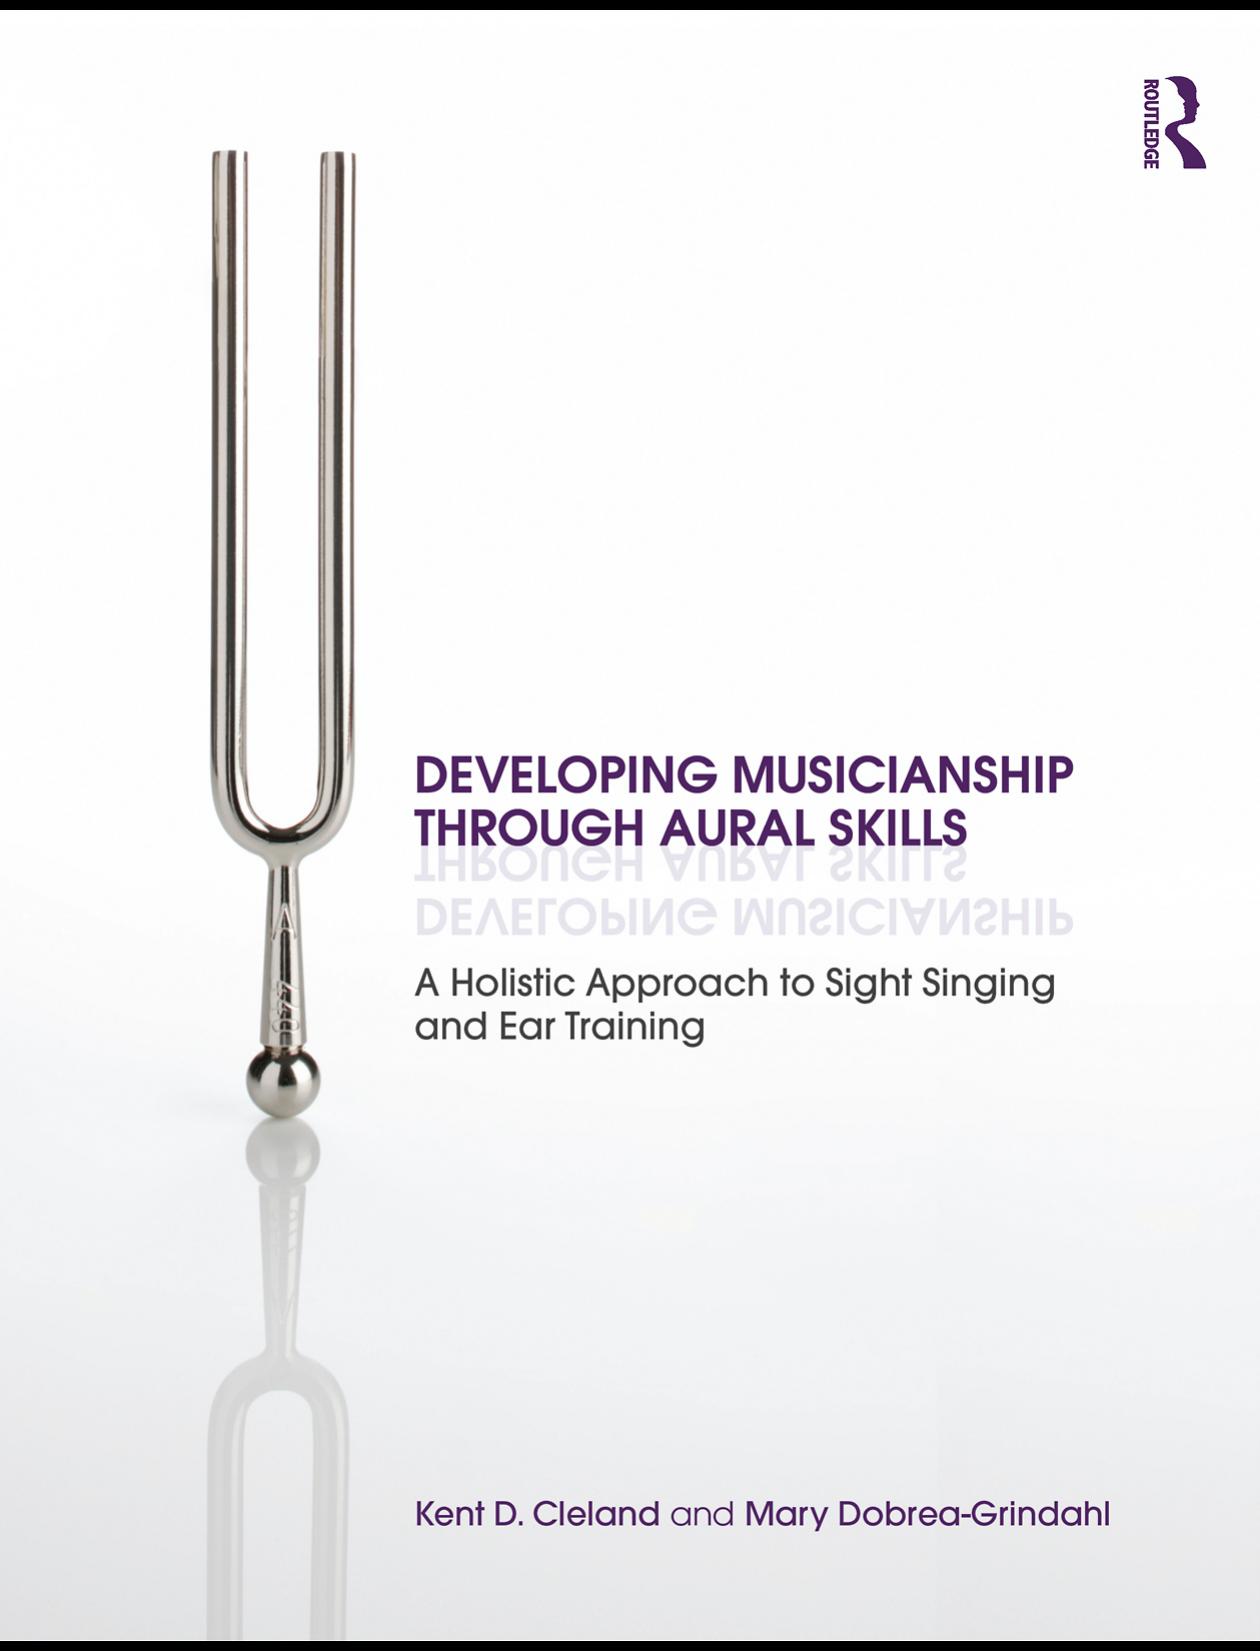 Developing Musicianship through Aural Skills: A Holistic Approach to Sight Singing and Ear Training